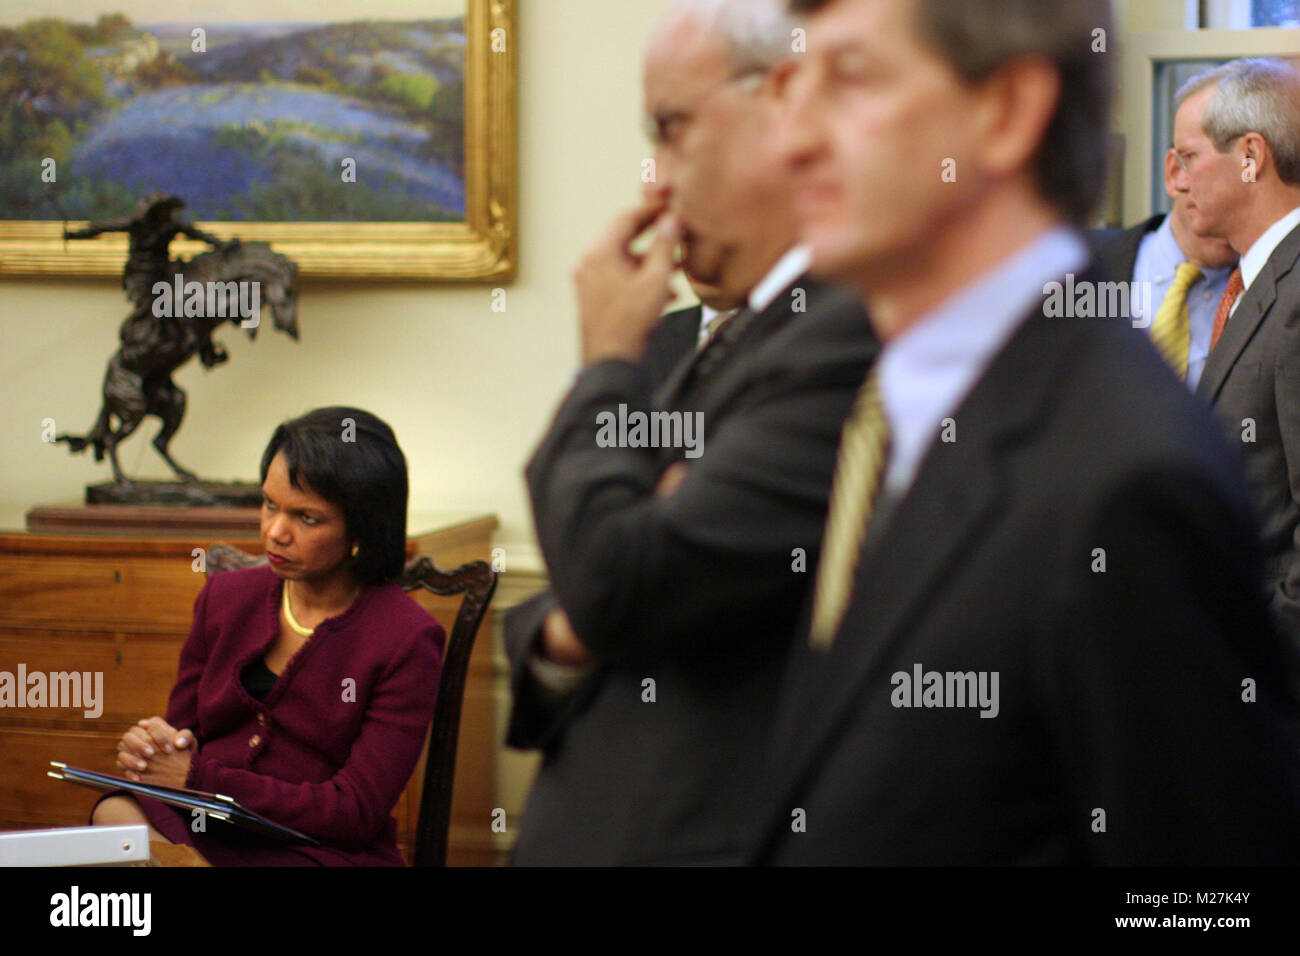 Washington, DC - December 19, 2008 -- United States Secretary of State Condolezza Rice listens as United States President George W. Bush meets with the President Mahmoud Abbas (Abu Mazen) of the Palestinian Authority in the Oval Office of the White House in Washington DC on Friday, December 19, 2008..Credit: Ken Cedeno / Pool via CNP /MediaPunch Stock Photo